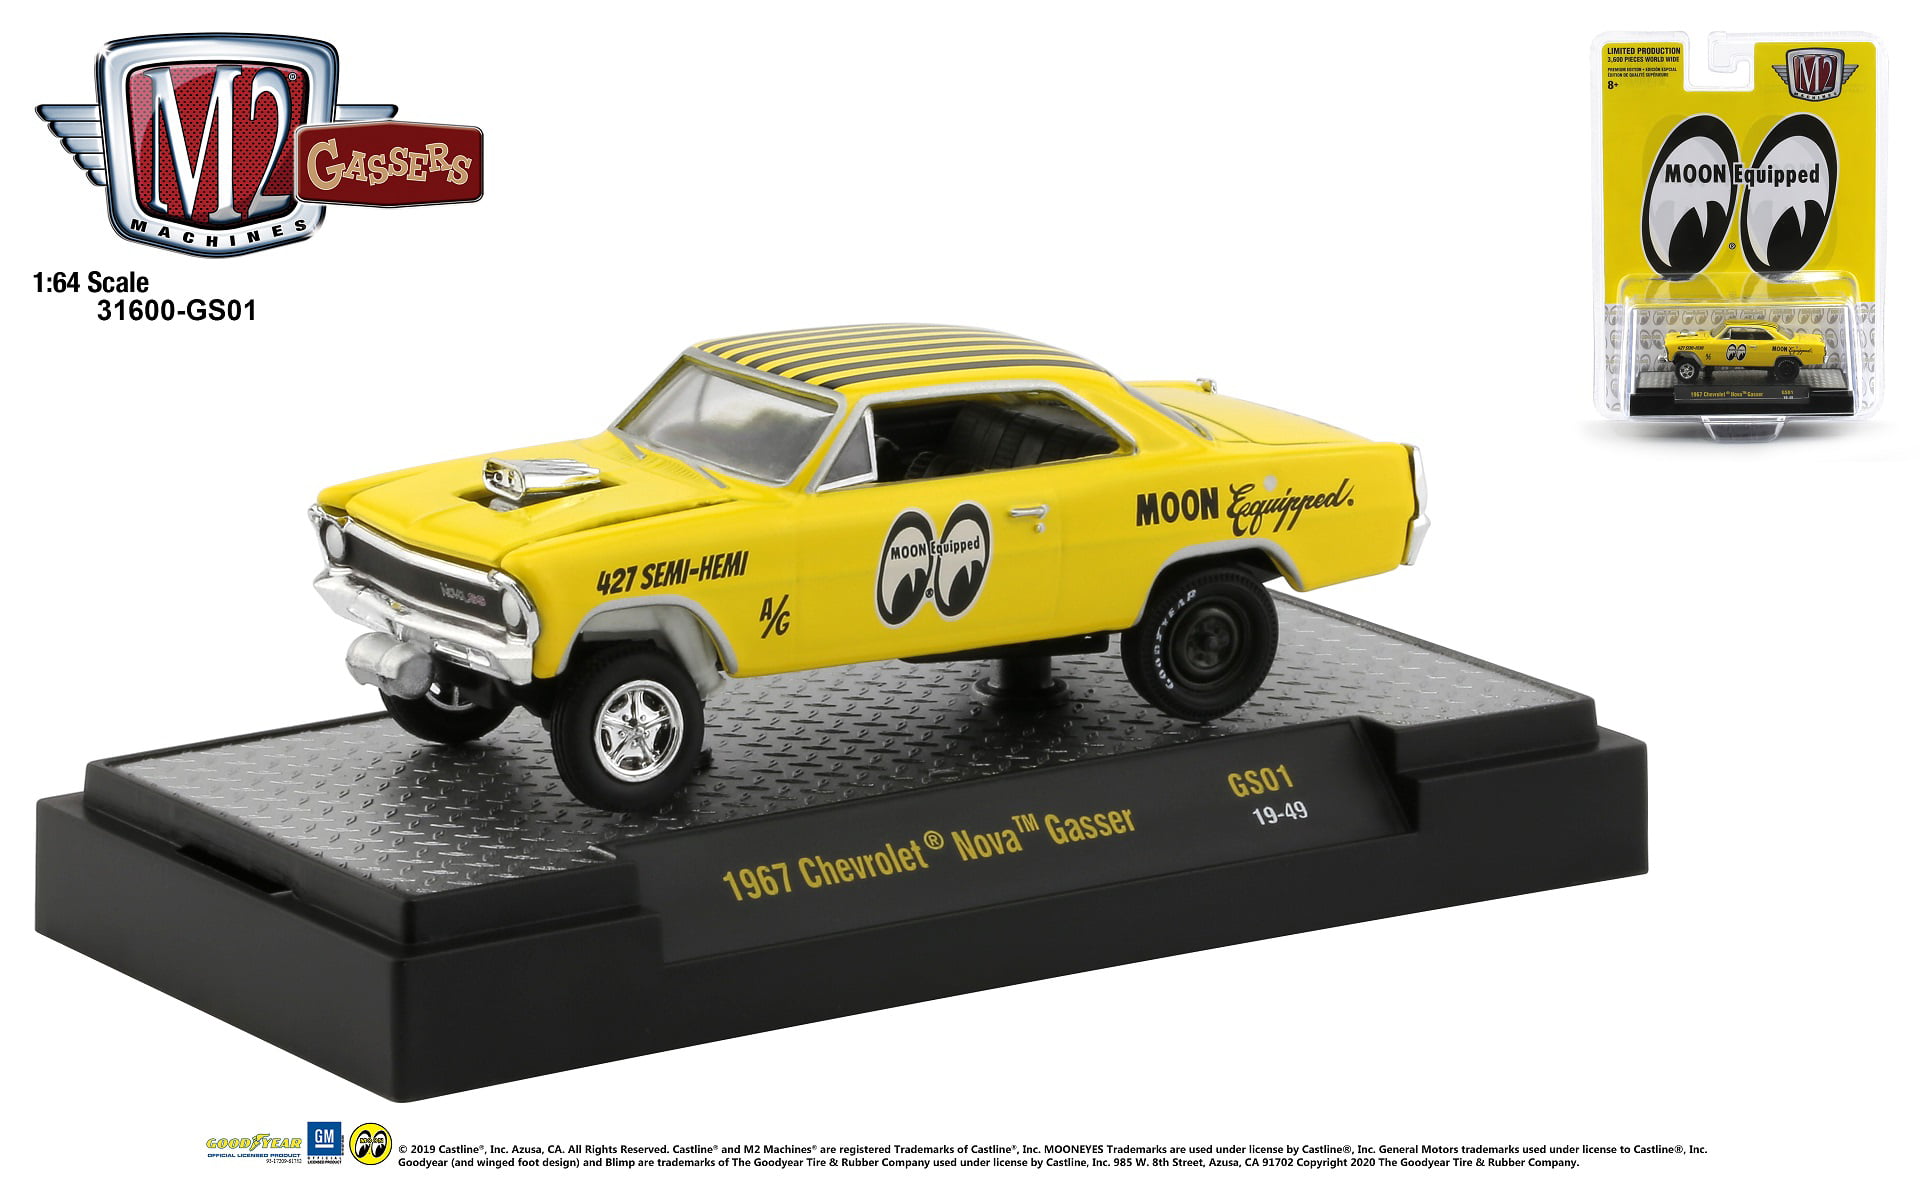 M2 Machines by M2 Collectible Gassers 1967 Chevy Nova Gasser 1:64 Scale R51 20-05 Cream Details Like NO Other 1 of 6880